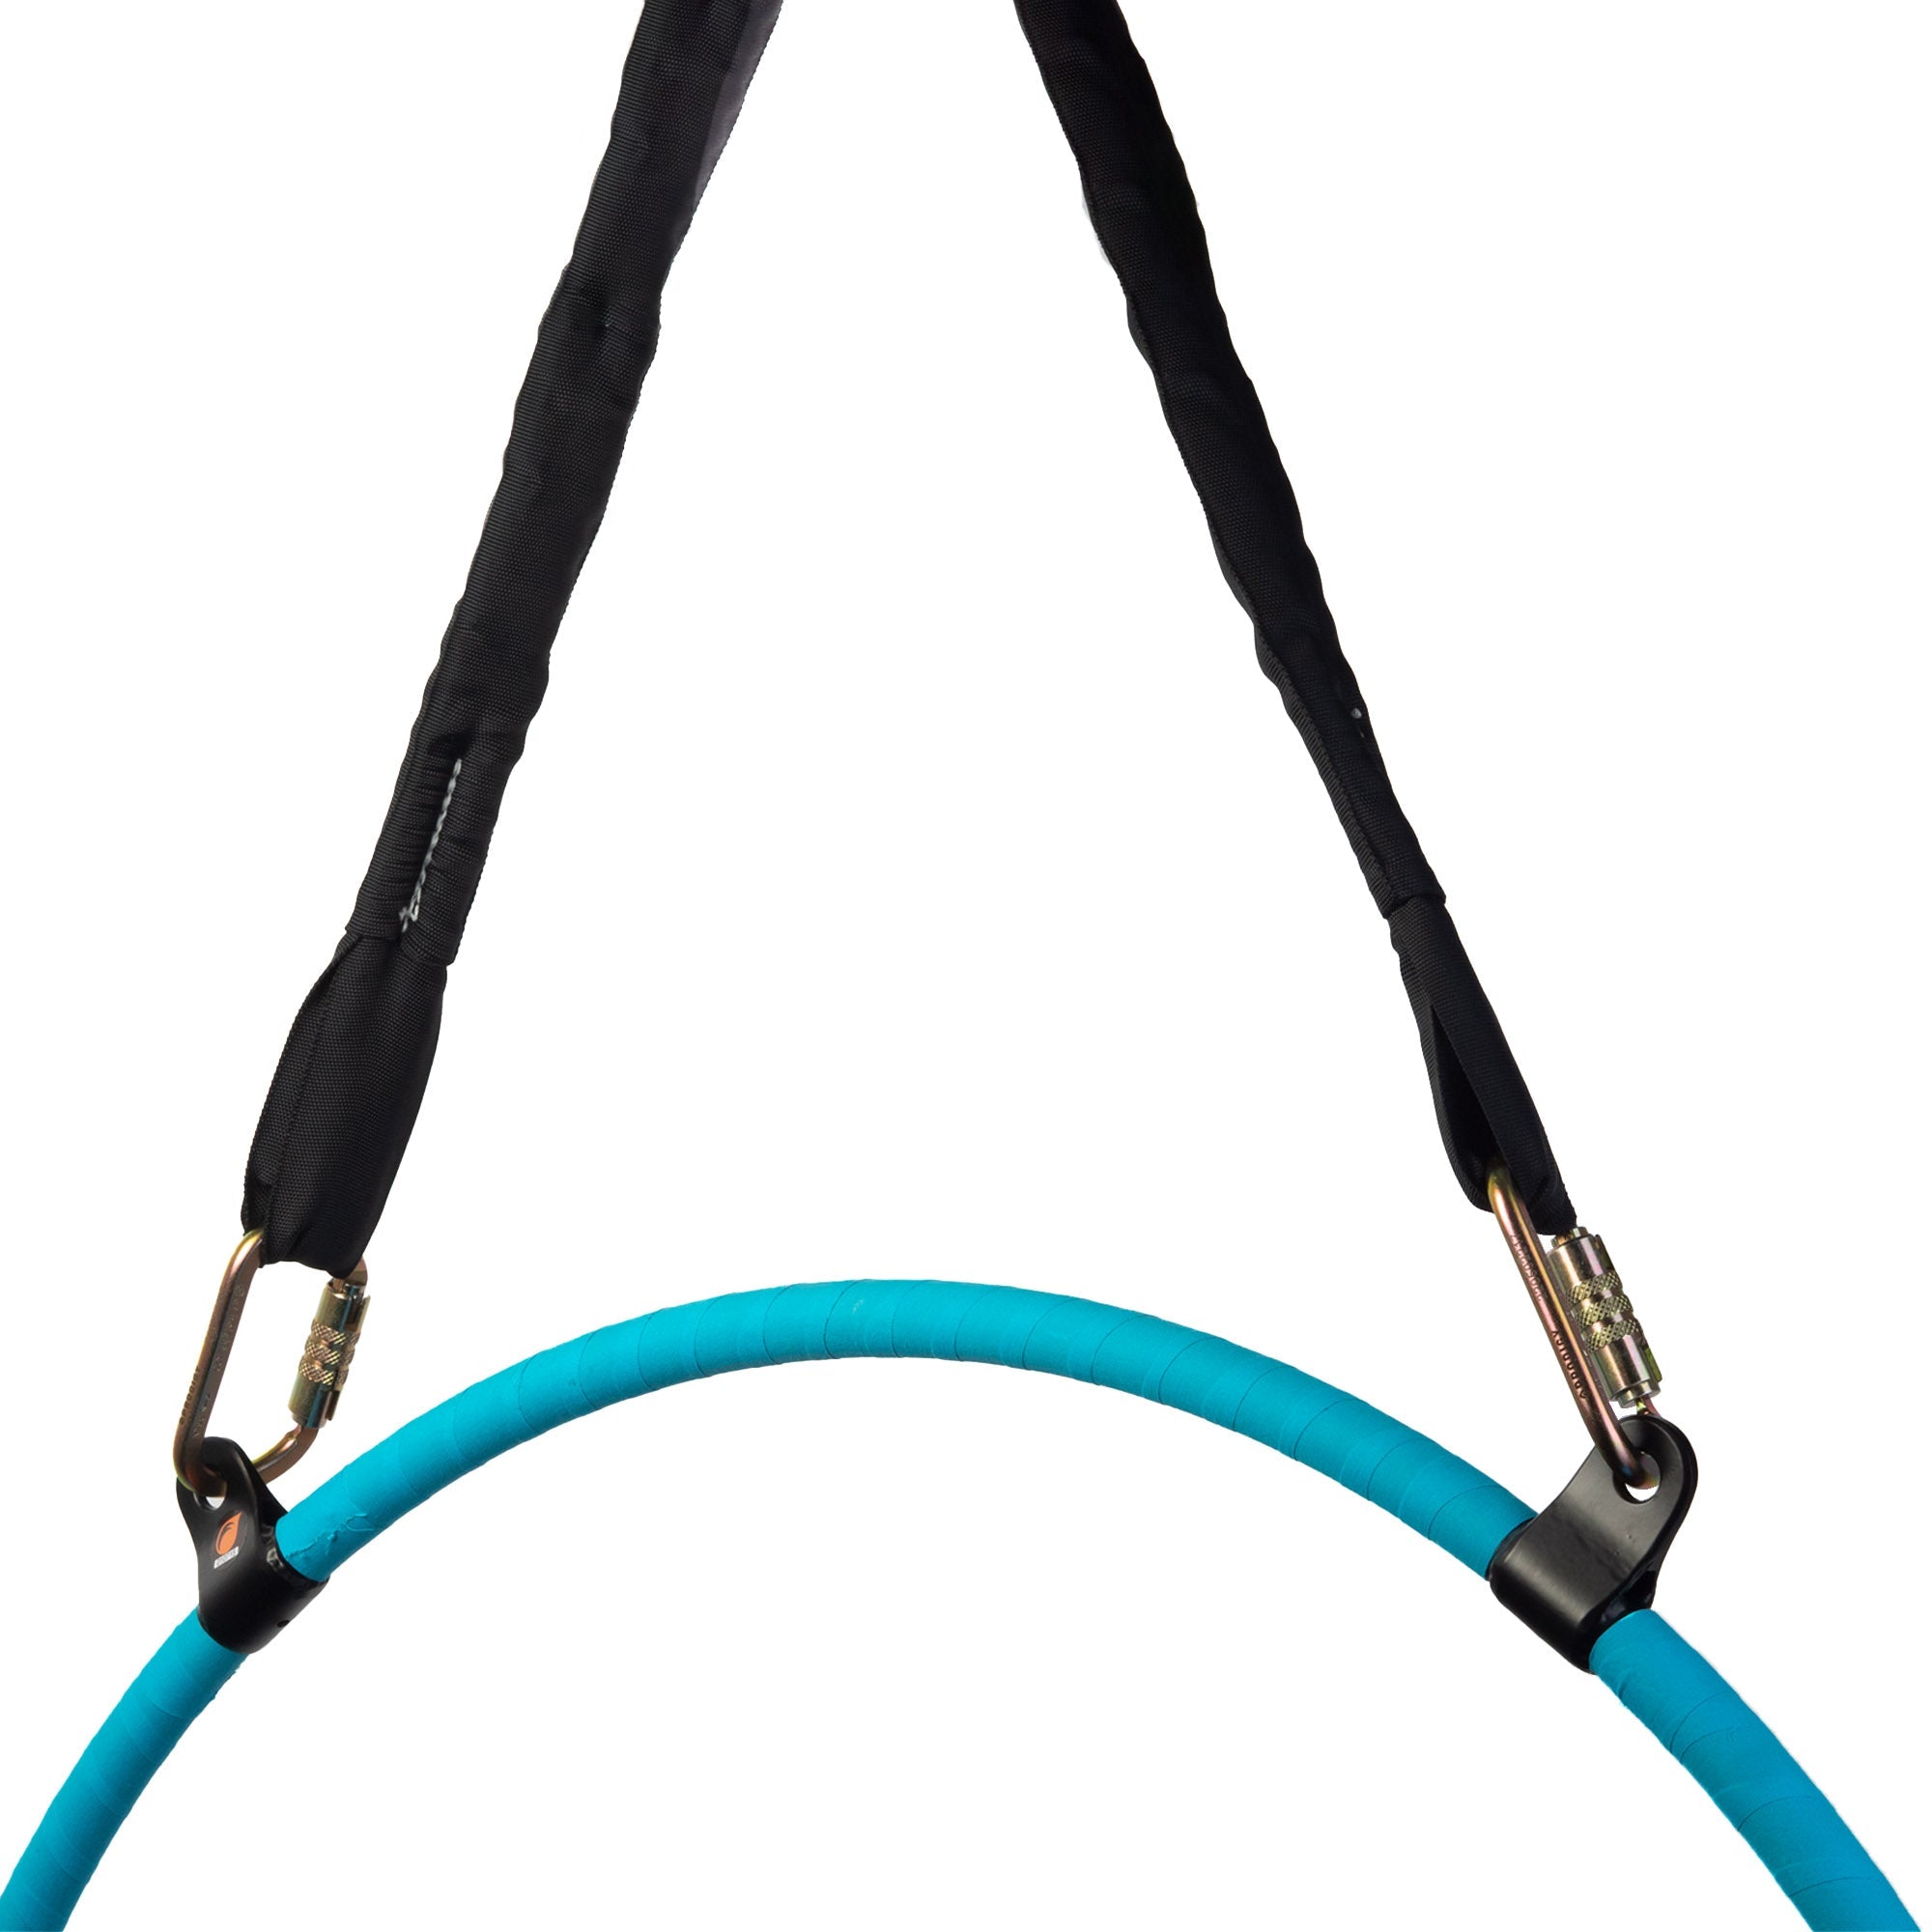 offset oval carabiner rigged